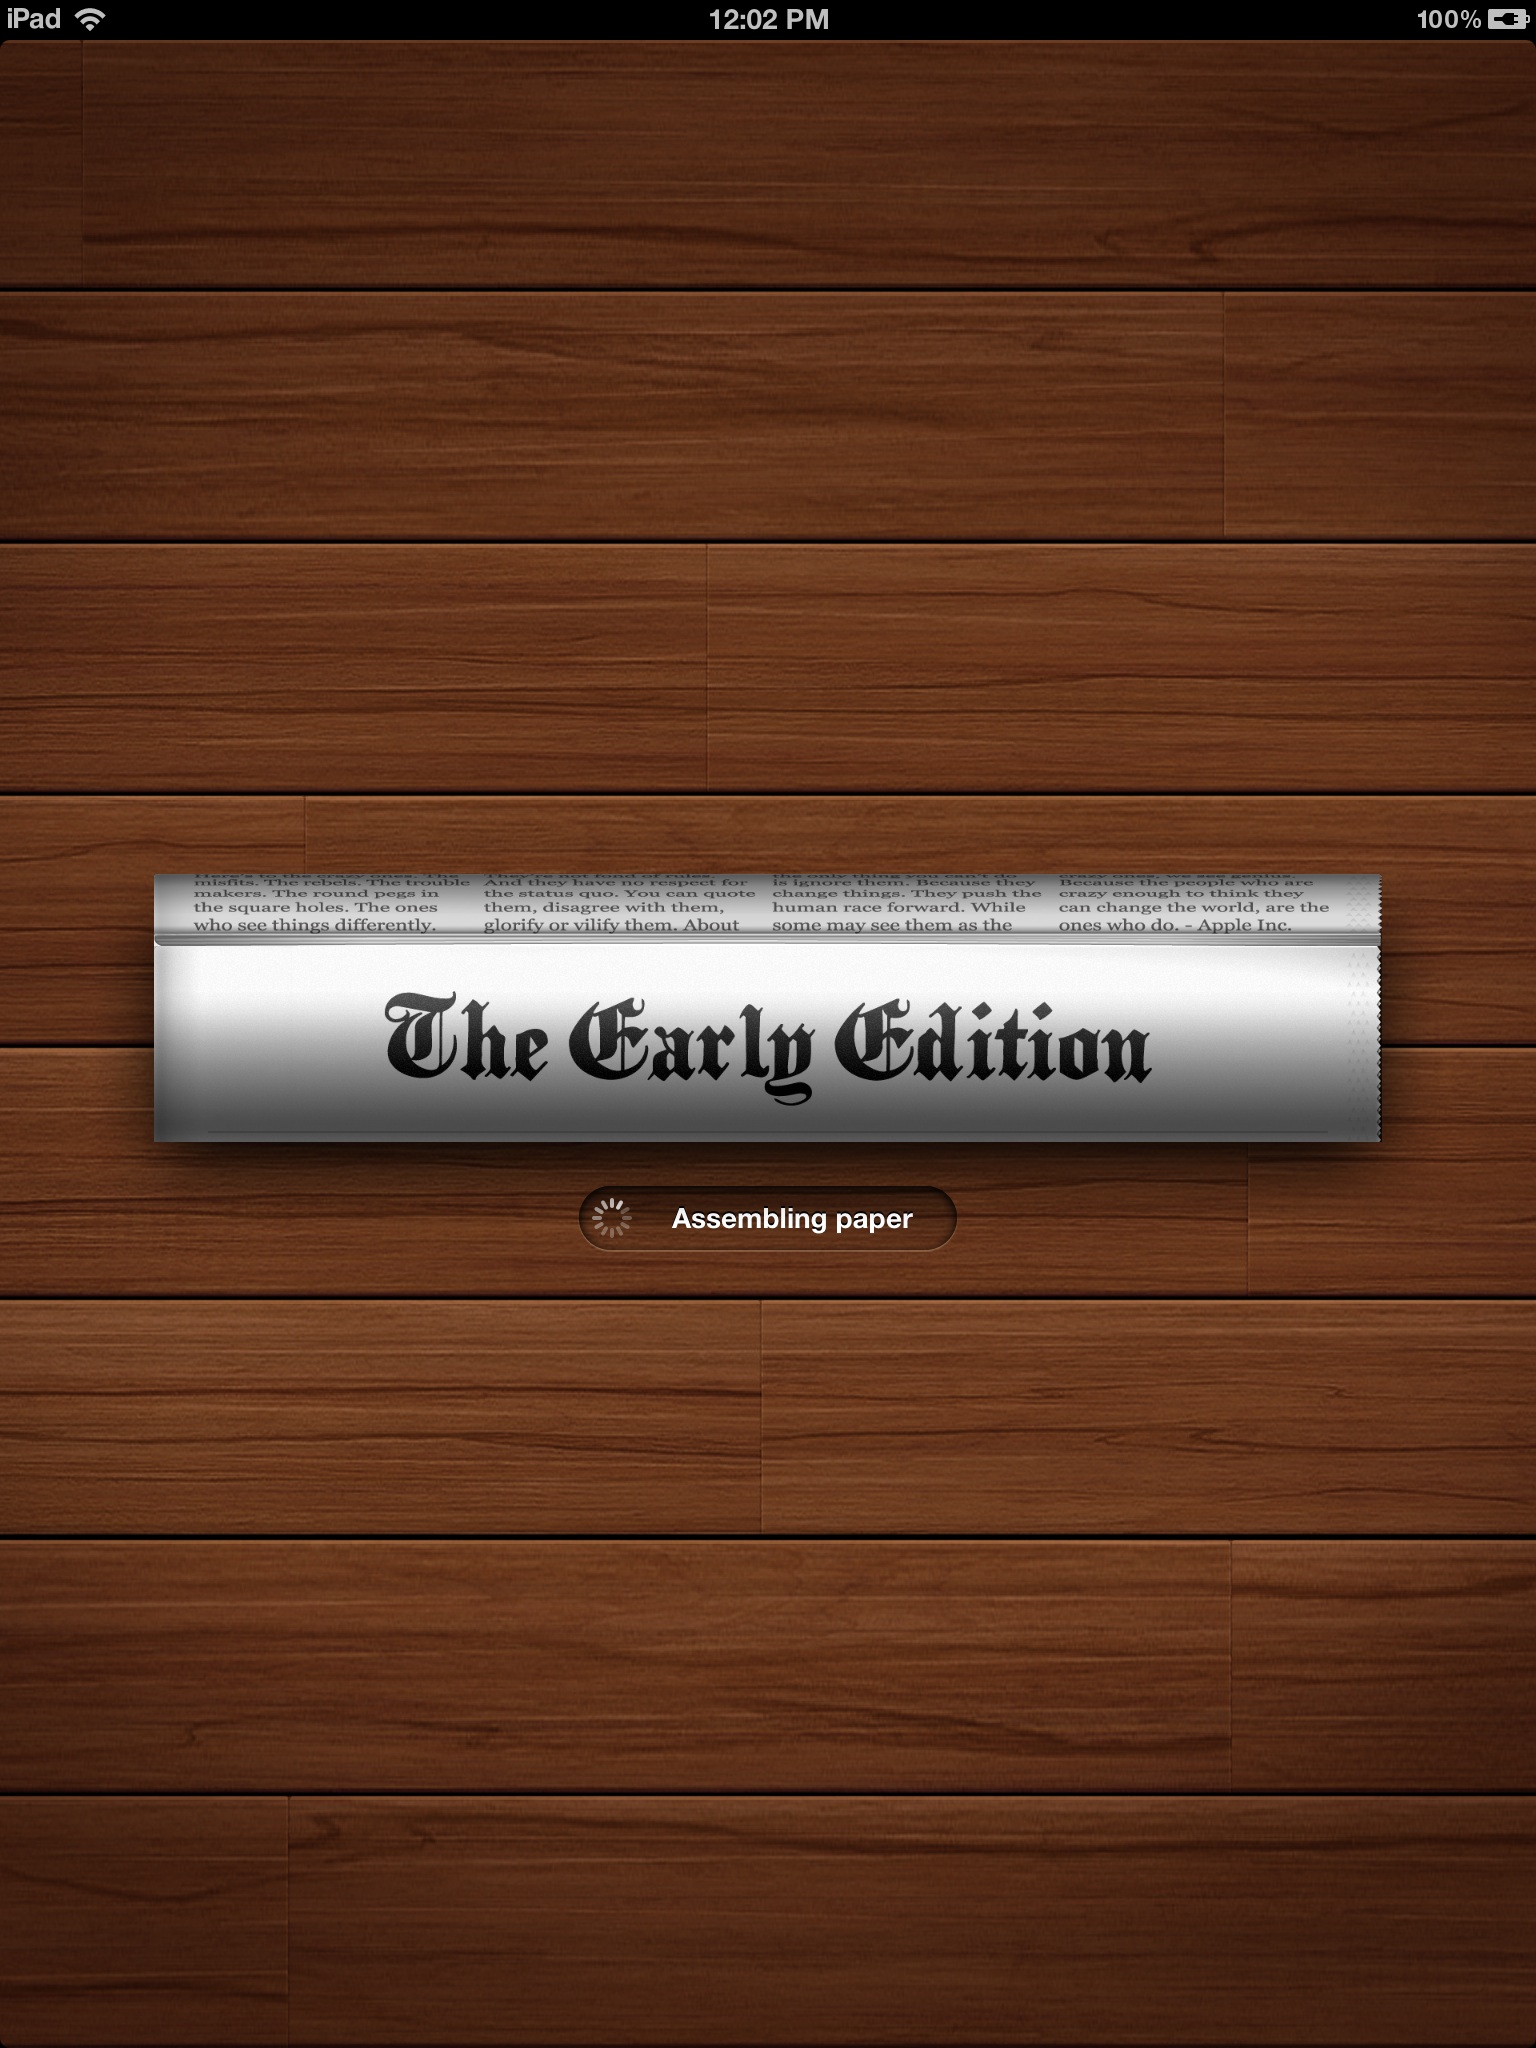 Early Edition 2 for iPad interface 1